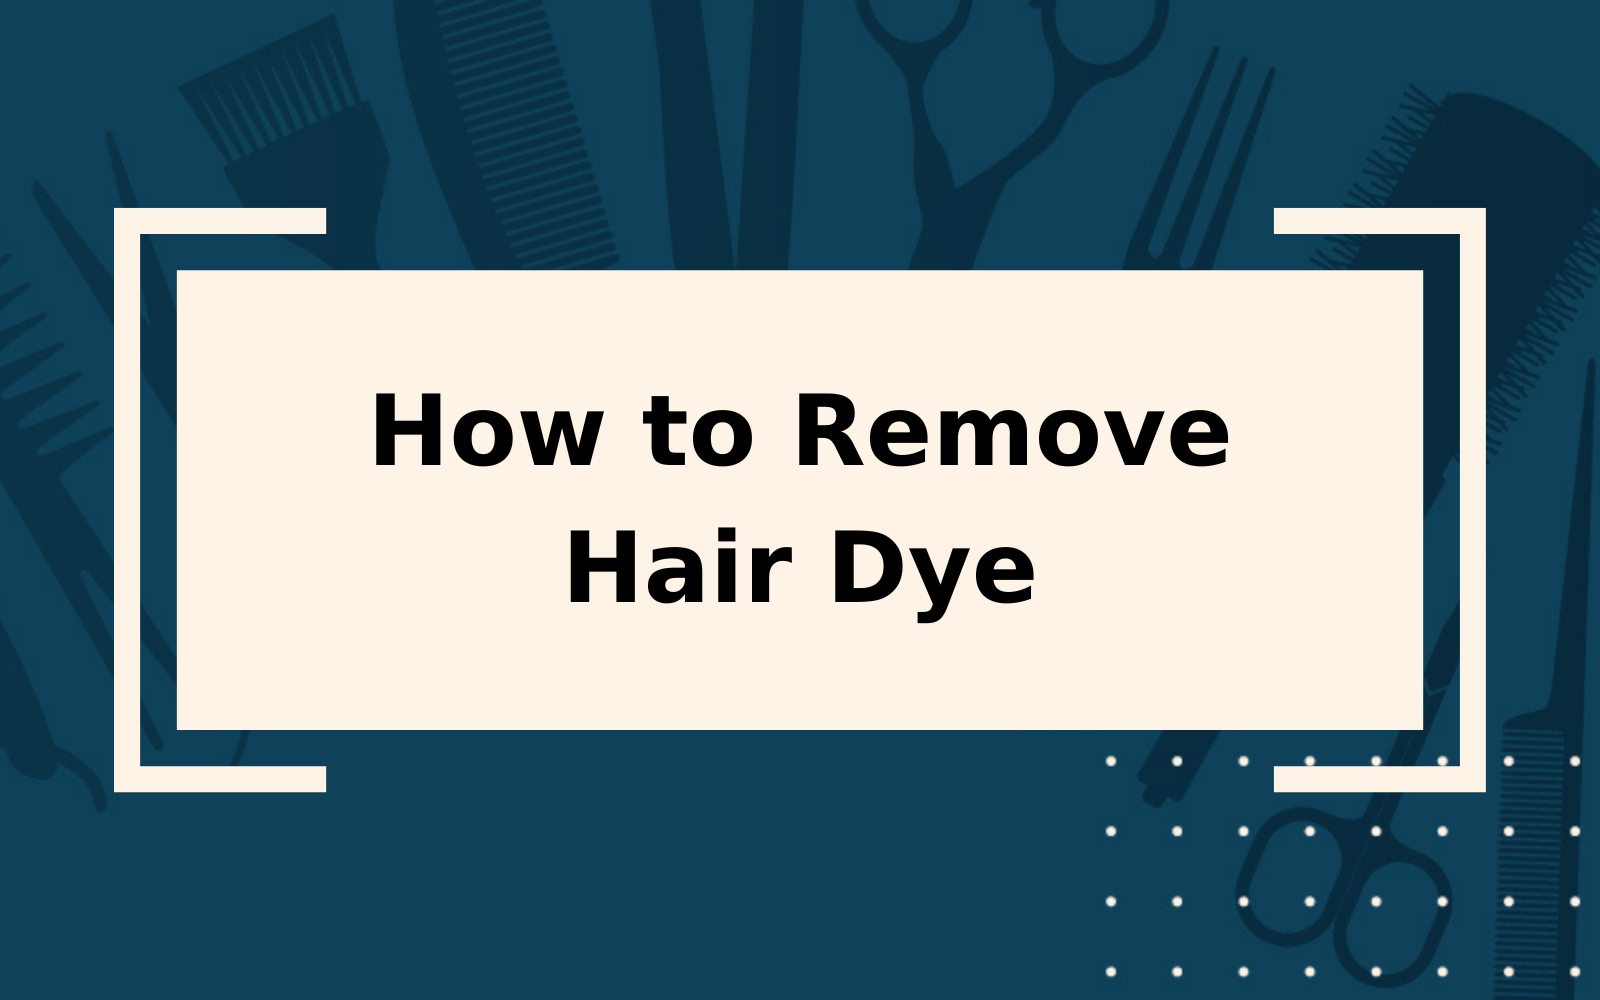 How to Remove Hair Dye | Step-by-Step Guide